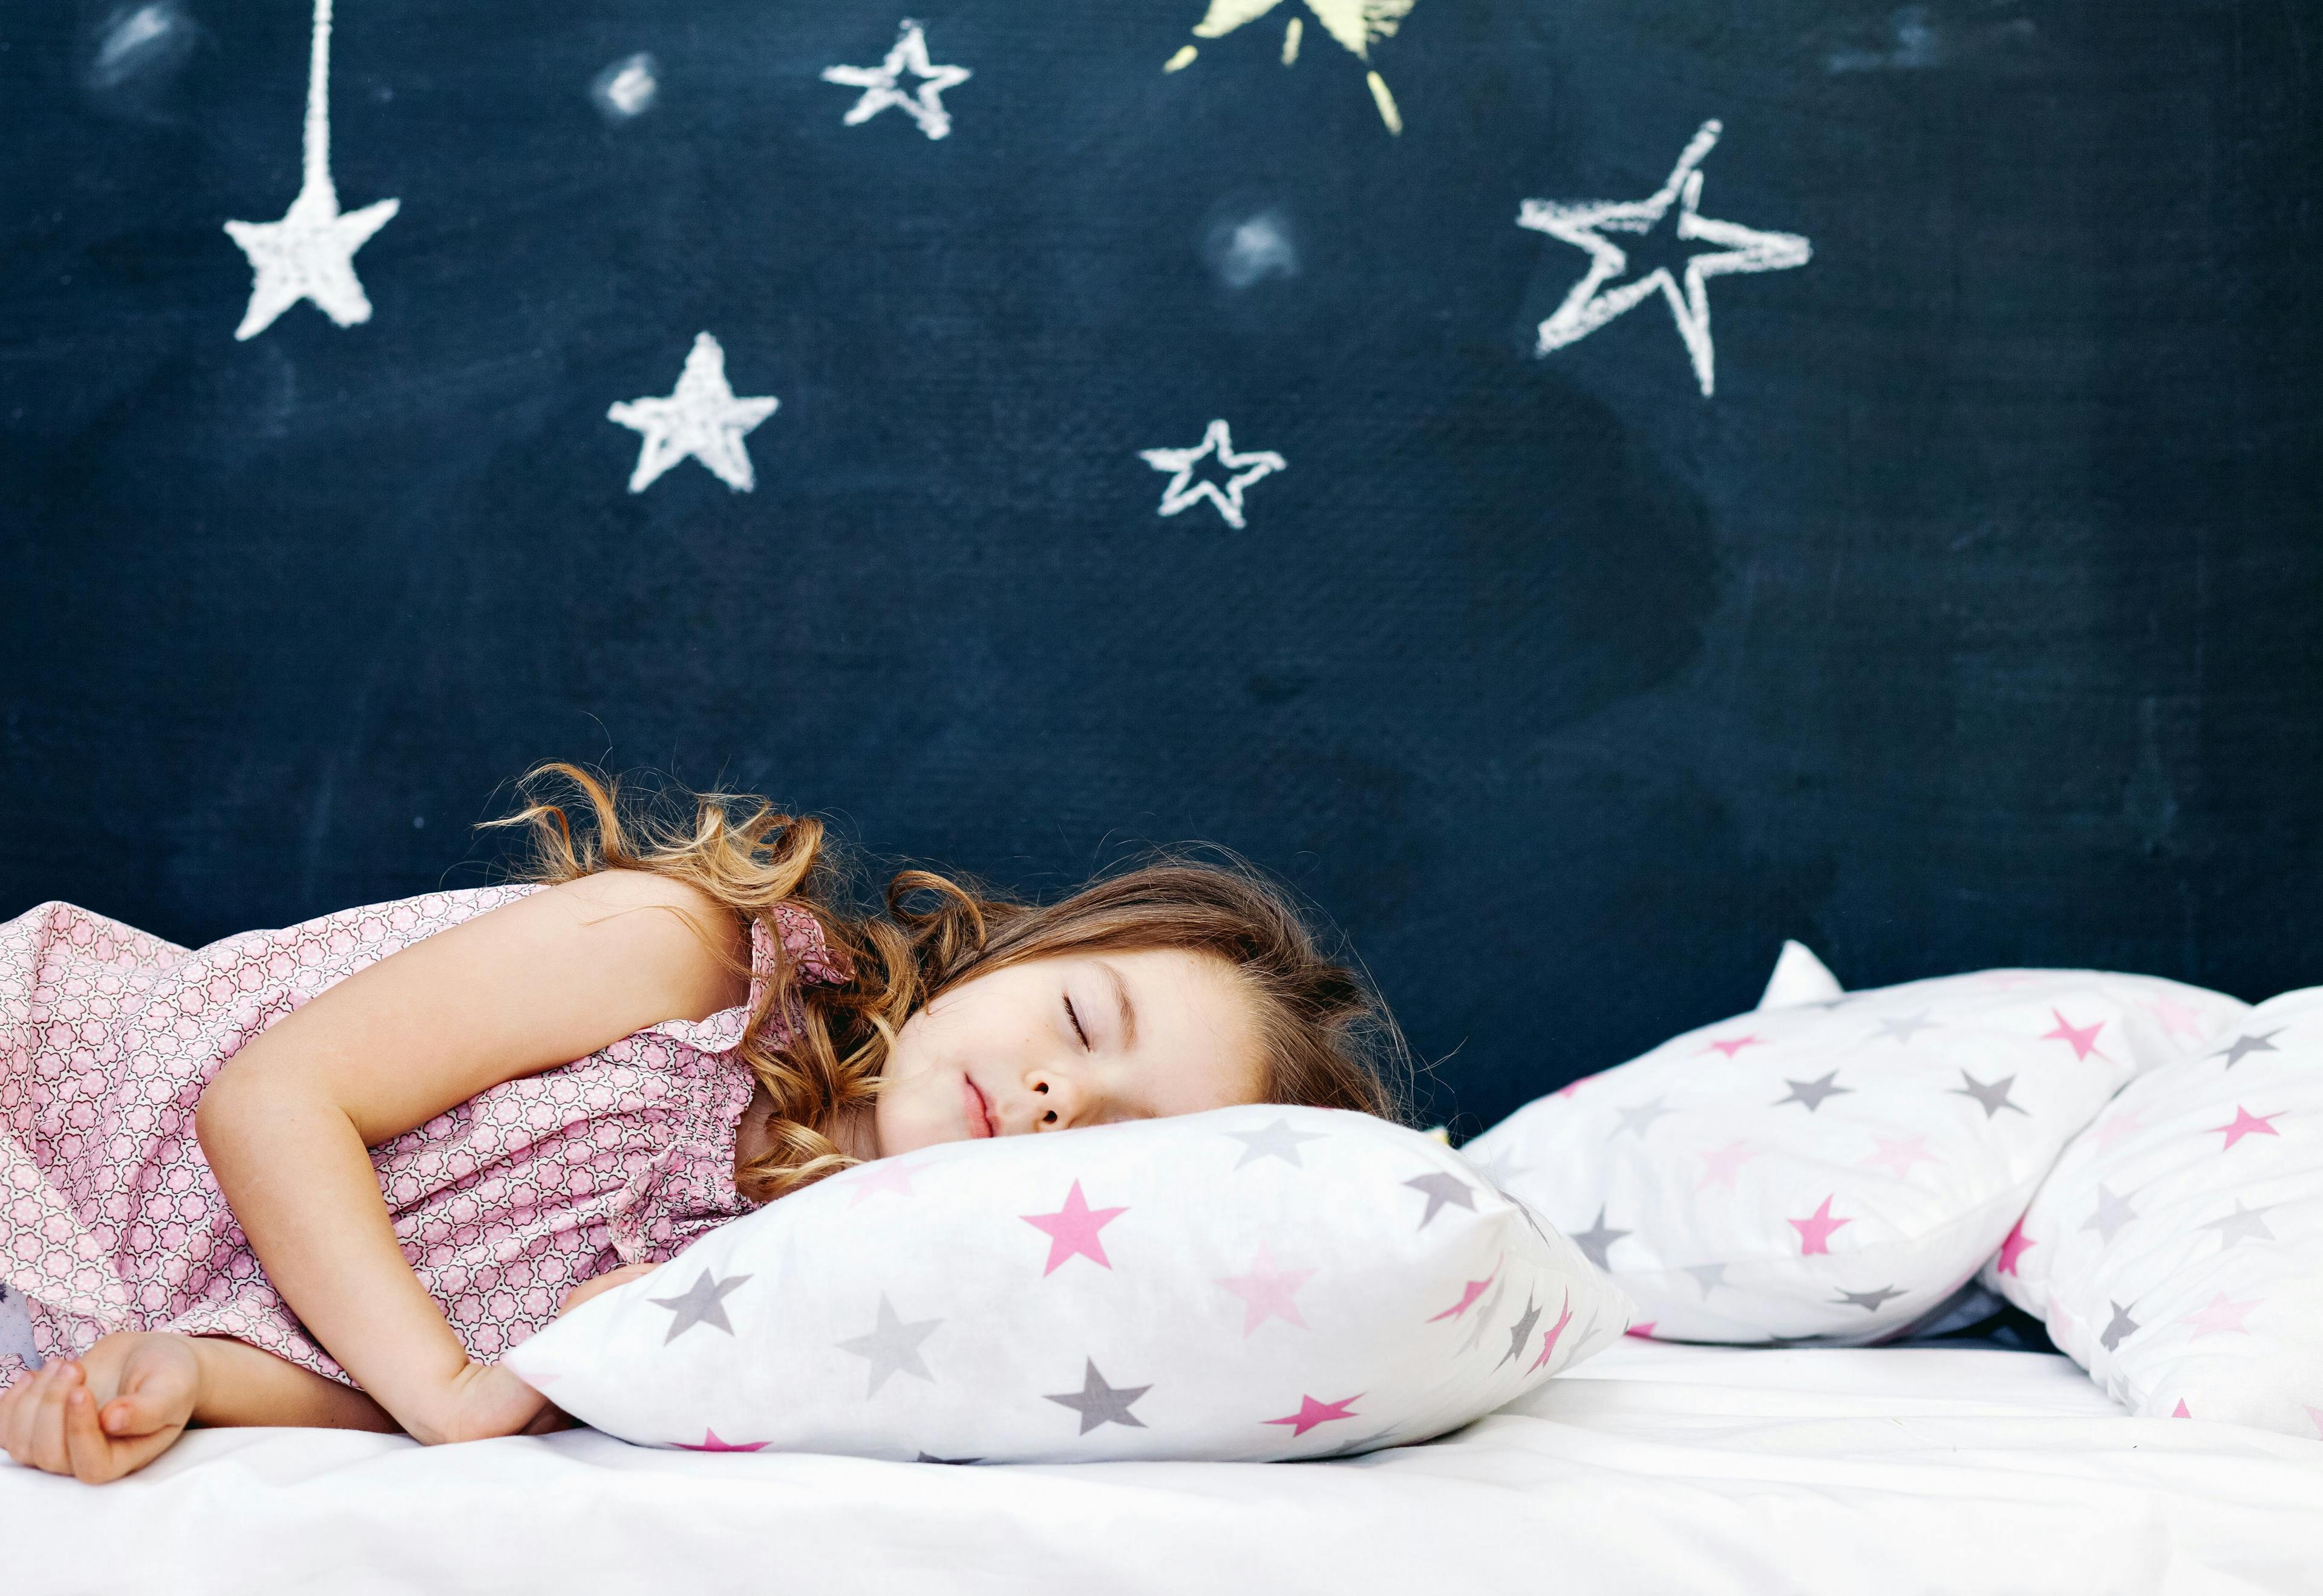 Early childhood sleep intervention is more cost-effective for lower socioeconomic groups